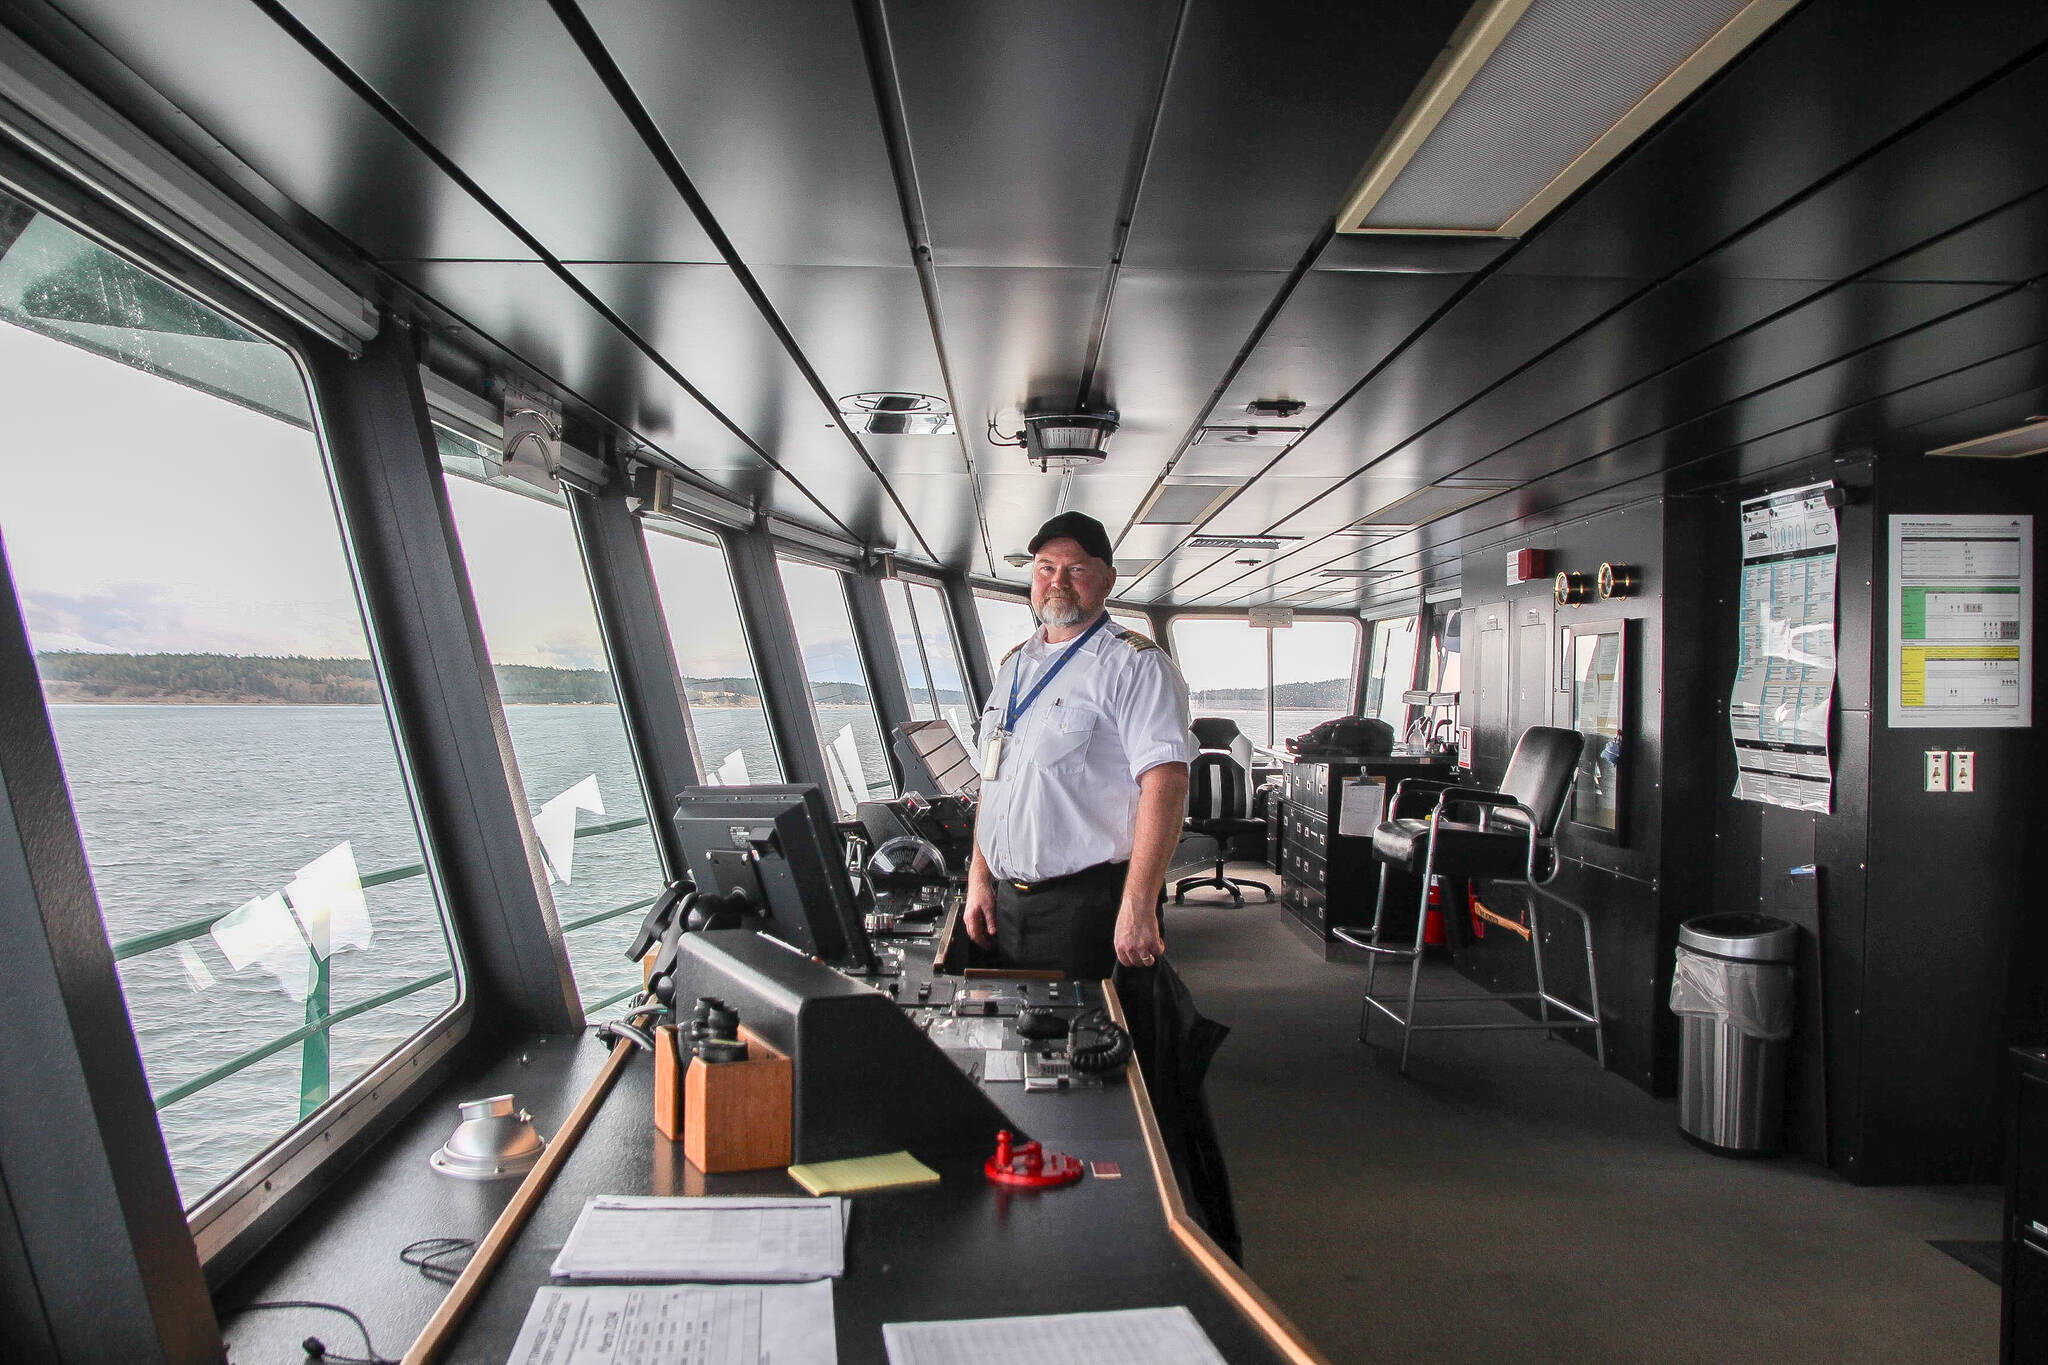 Luisa Loi / Whidbey News Group
Captain Mark Gripp smiles surrounded by the displays and controls in the Kennewick’s pilothouse, moments before leaving Keystone Harbor.